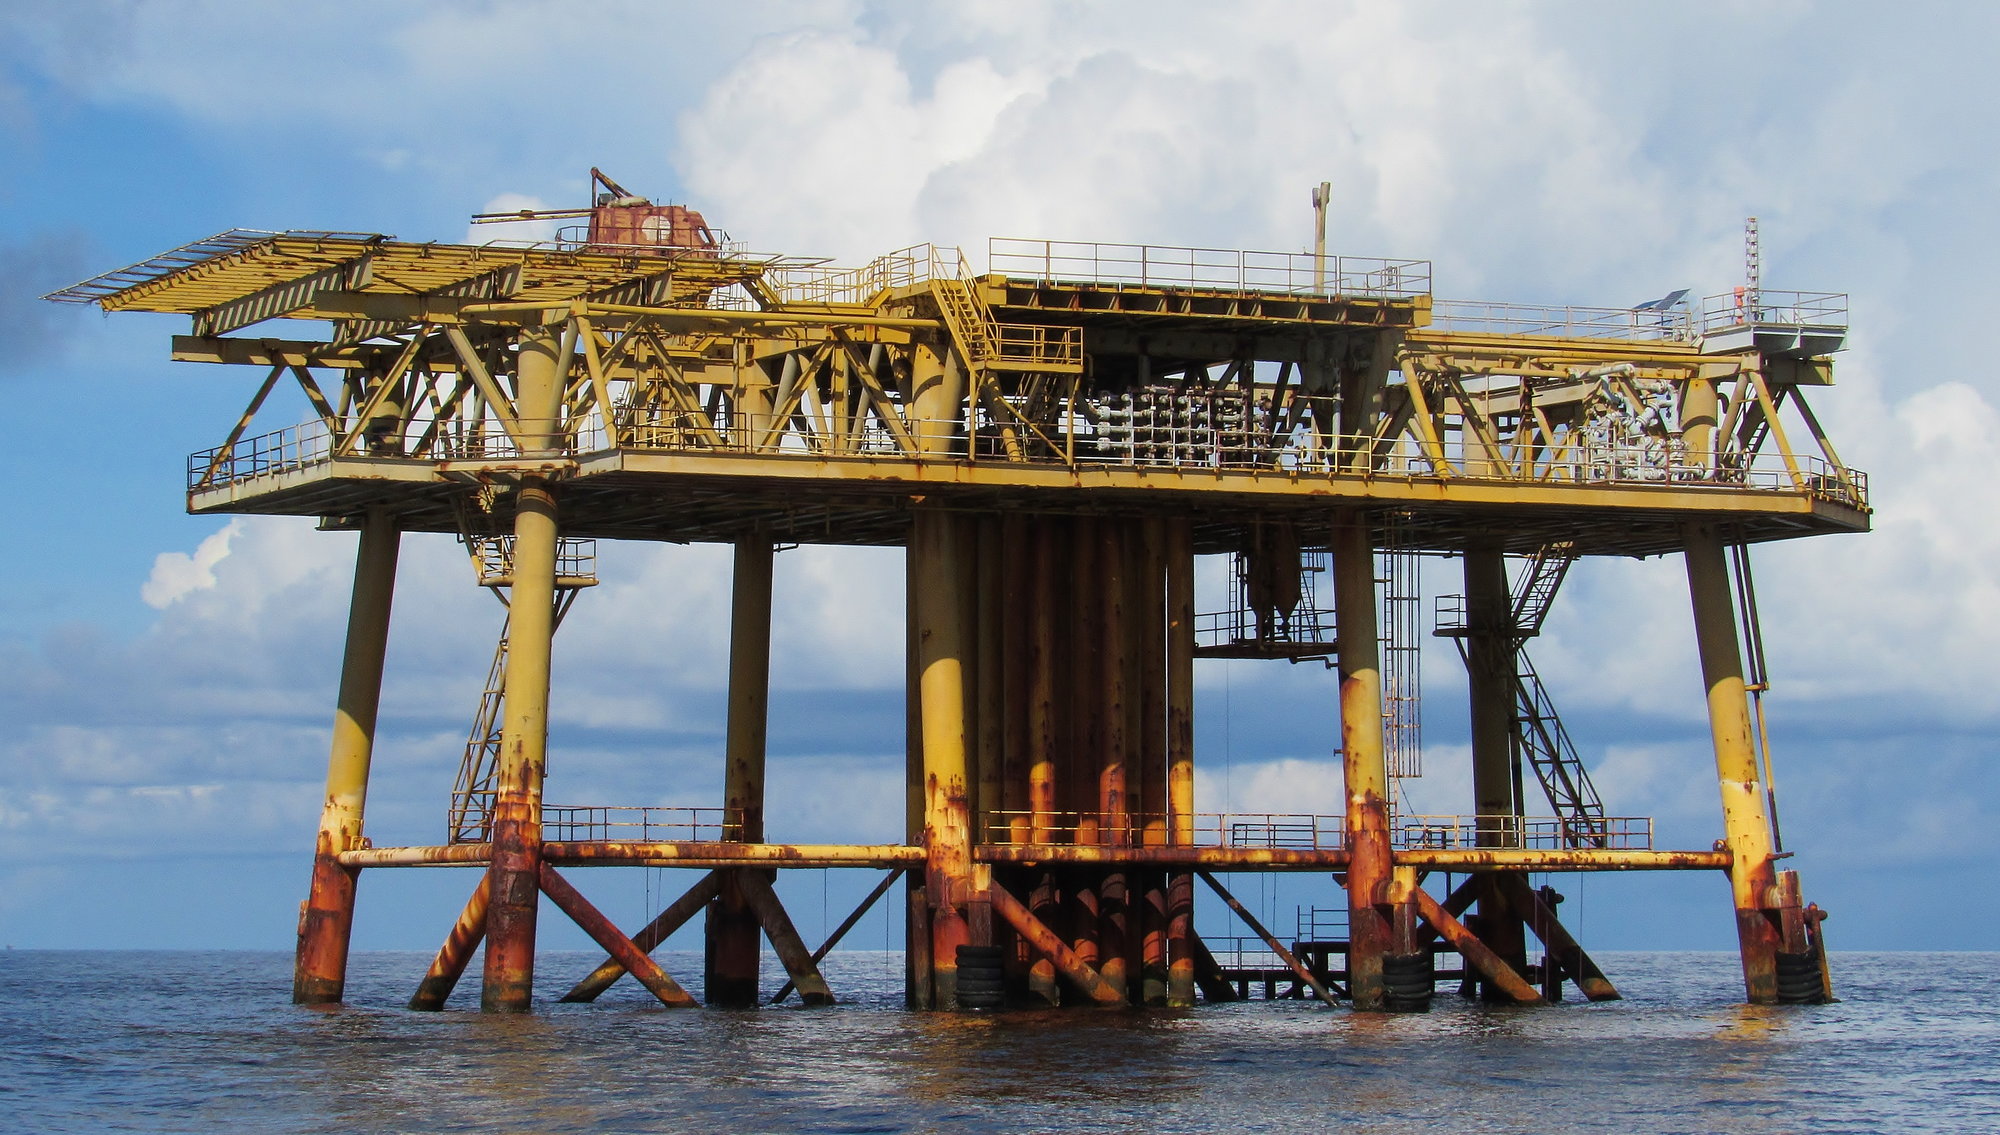 Help with oil rigs? - The Hull Truth - Boating and Fishing Forum